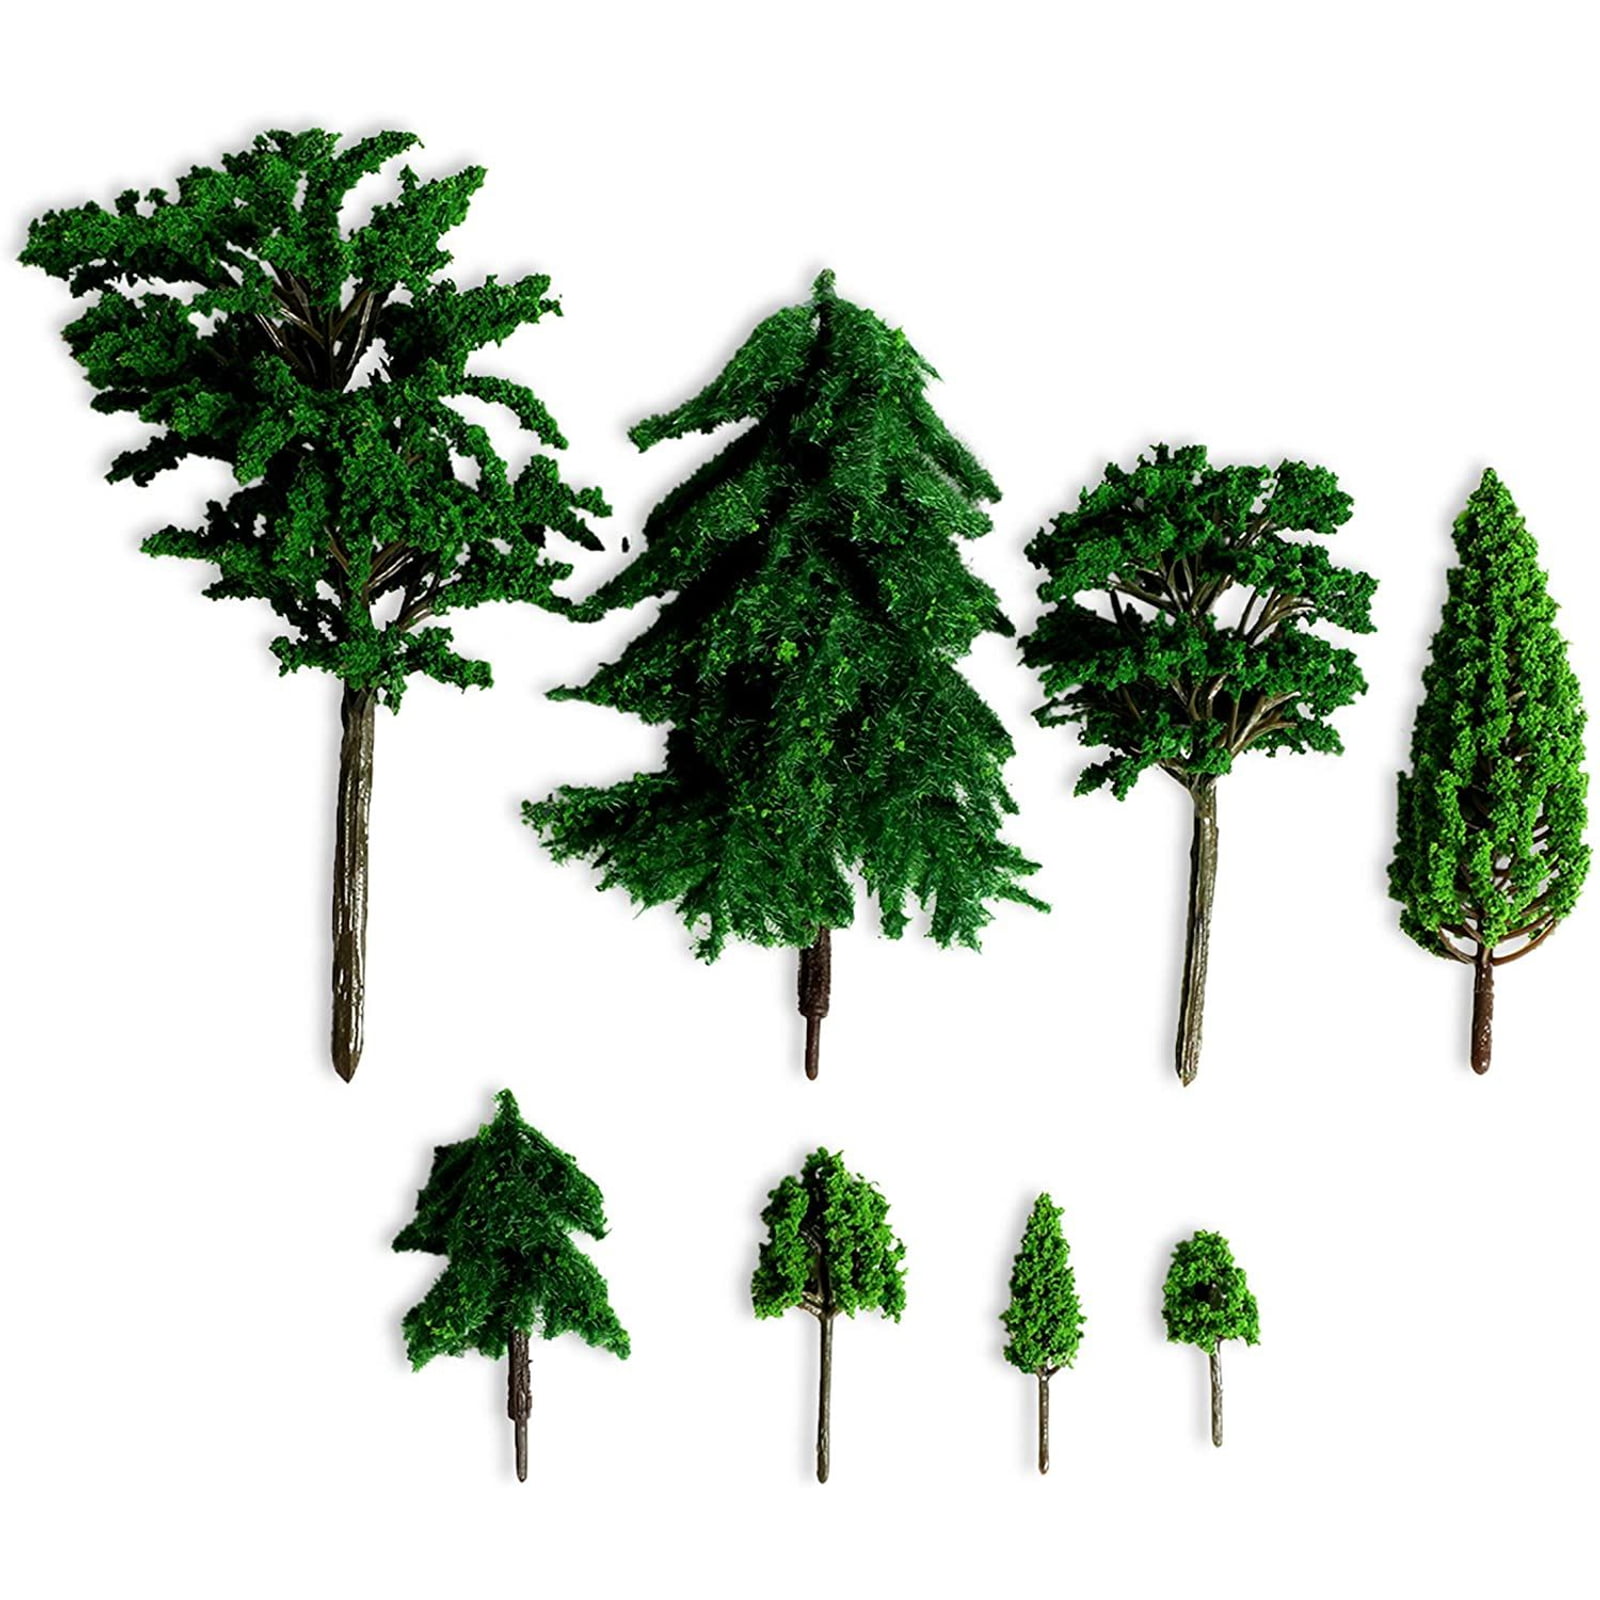 LUEYAO Mini Model Miniature Trees Mixed Train Scenery Architecture Trees Fake Trees for DIY Crafts Building Model Scenery Landscape Green 1.2-3.9 inch 20 PCS 